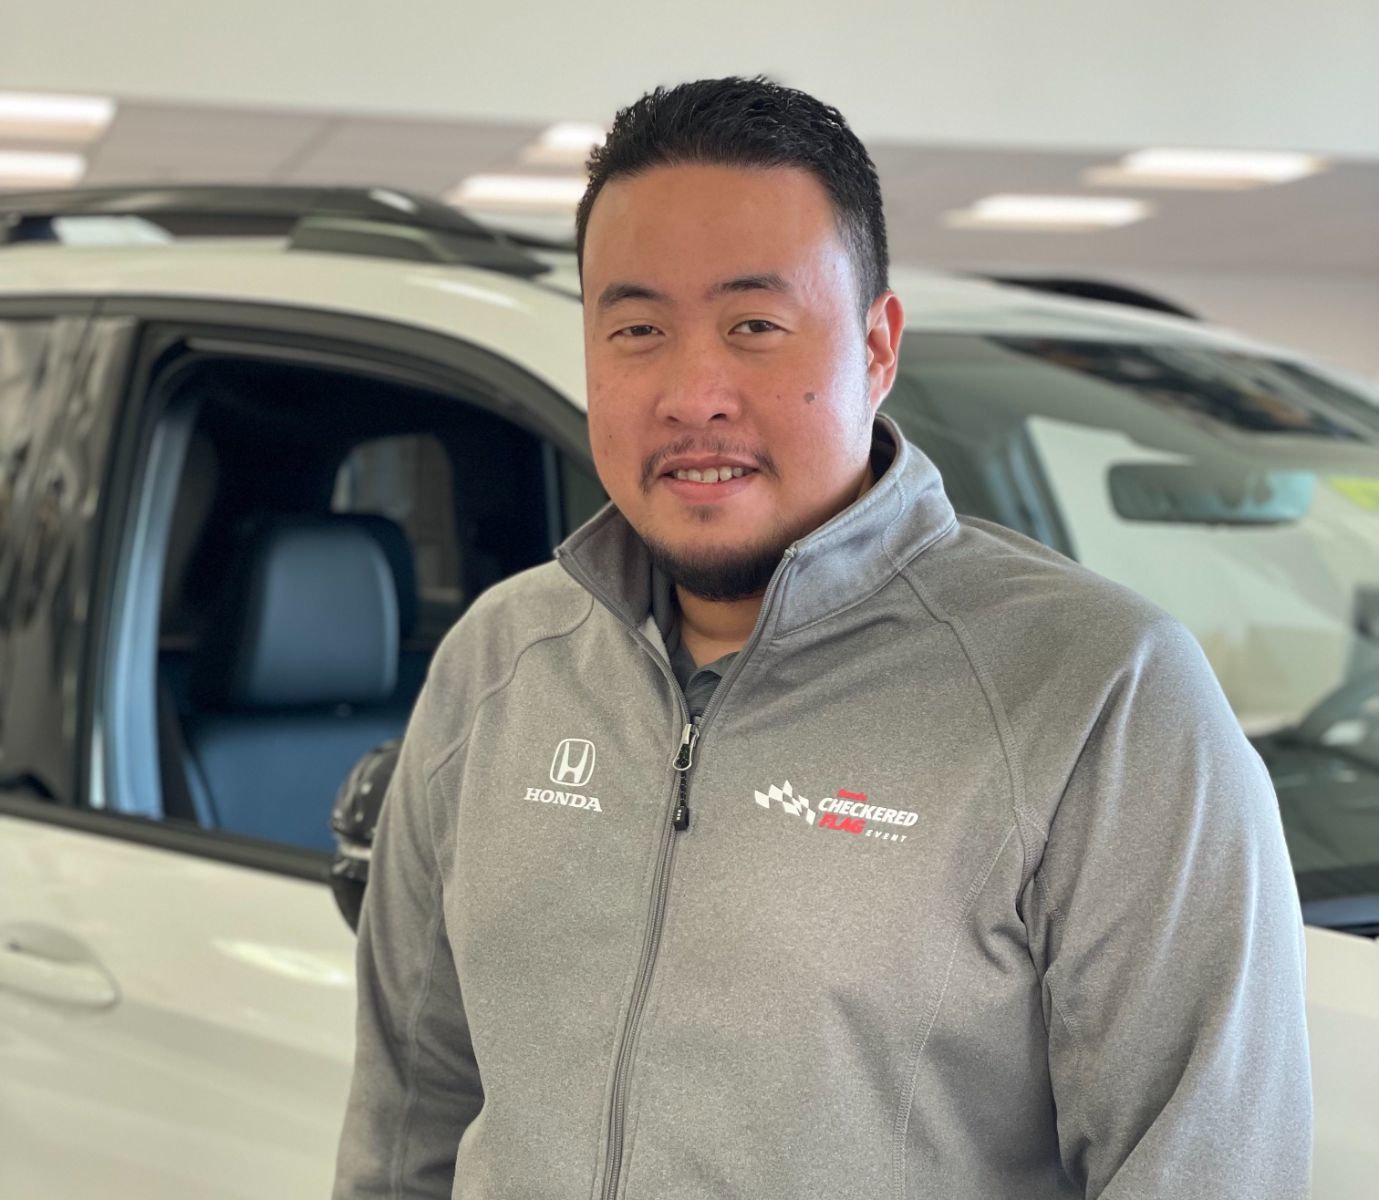 Sales Person of the Month: Jan Shane Torres